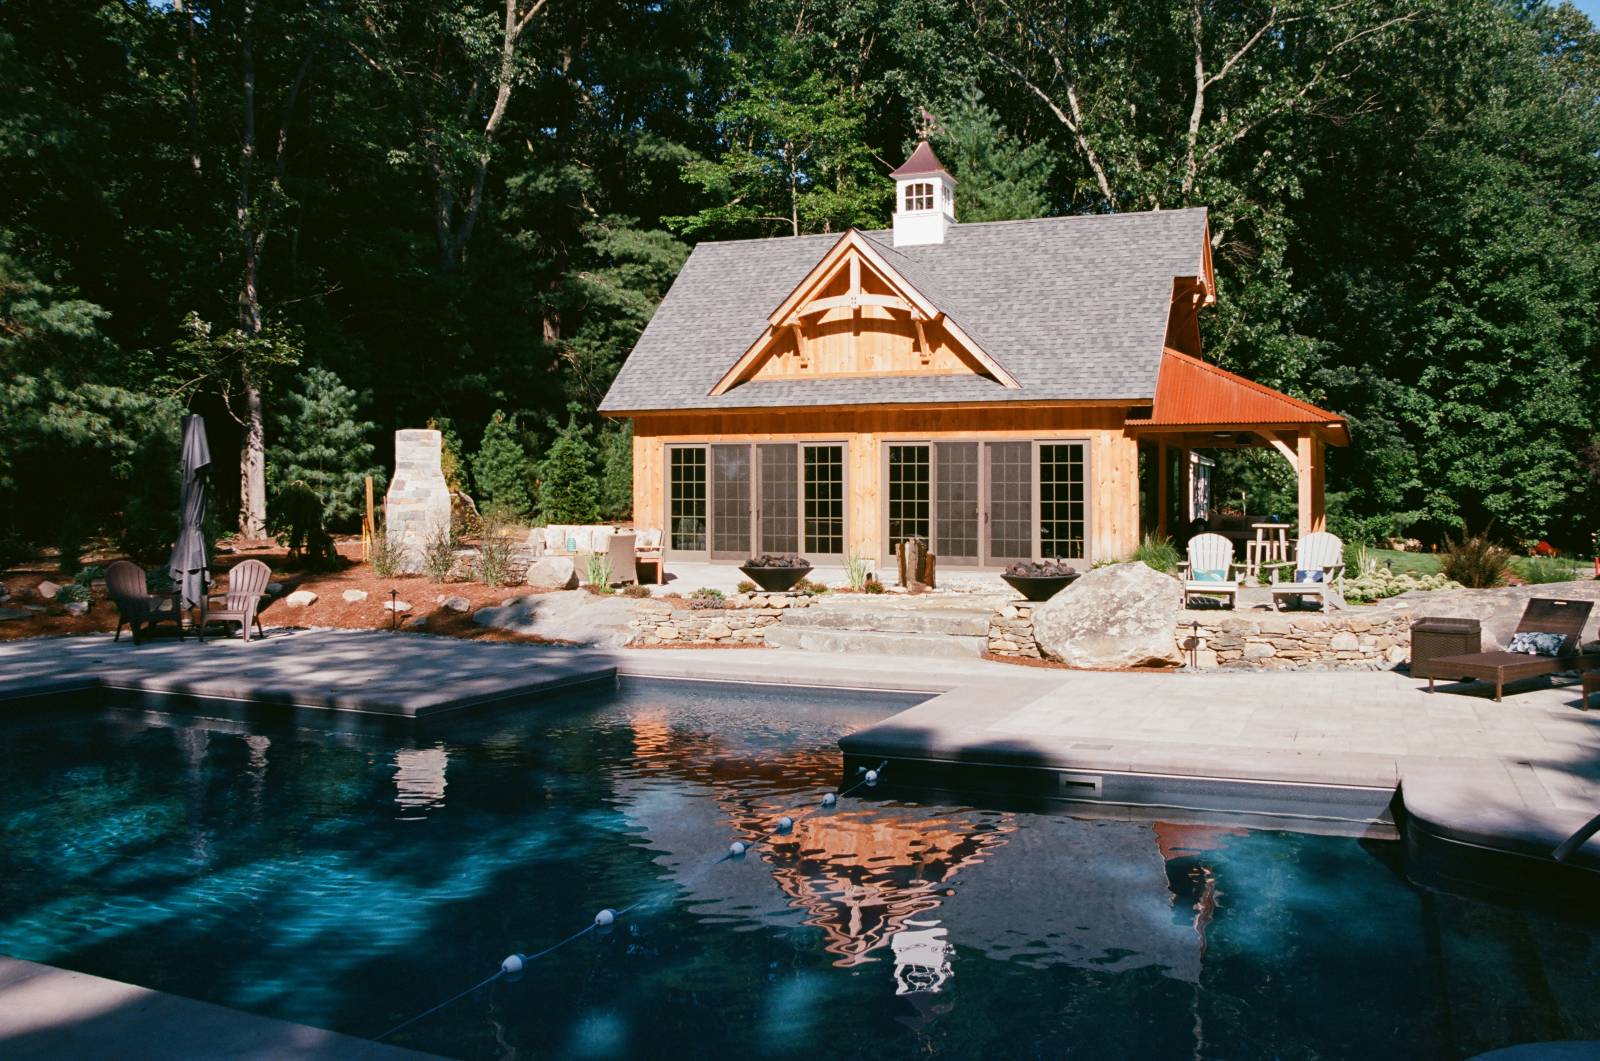 Wide Shot Showing the Custom Stone Work & Pool in Front of the Pool House